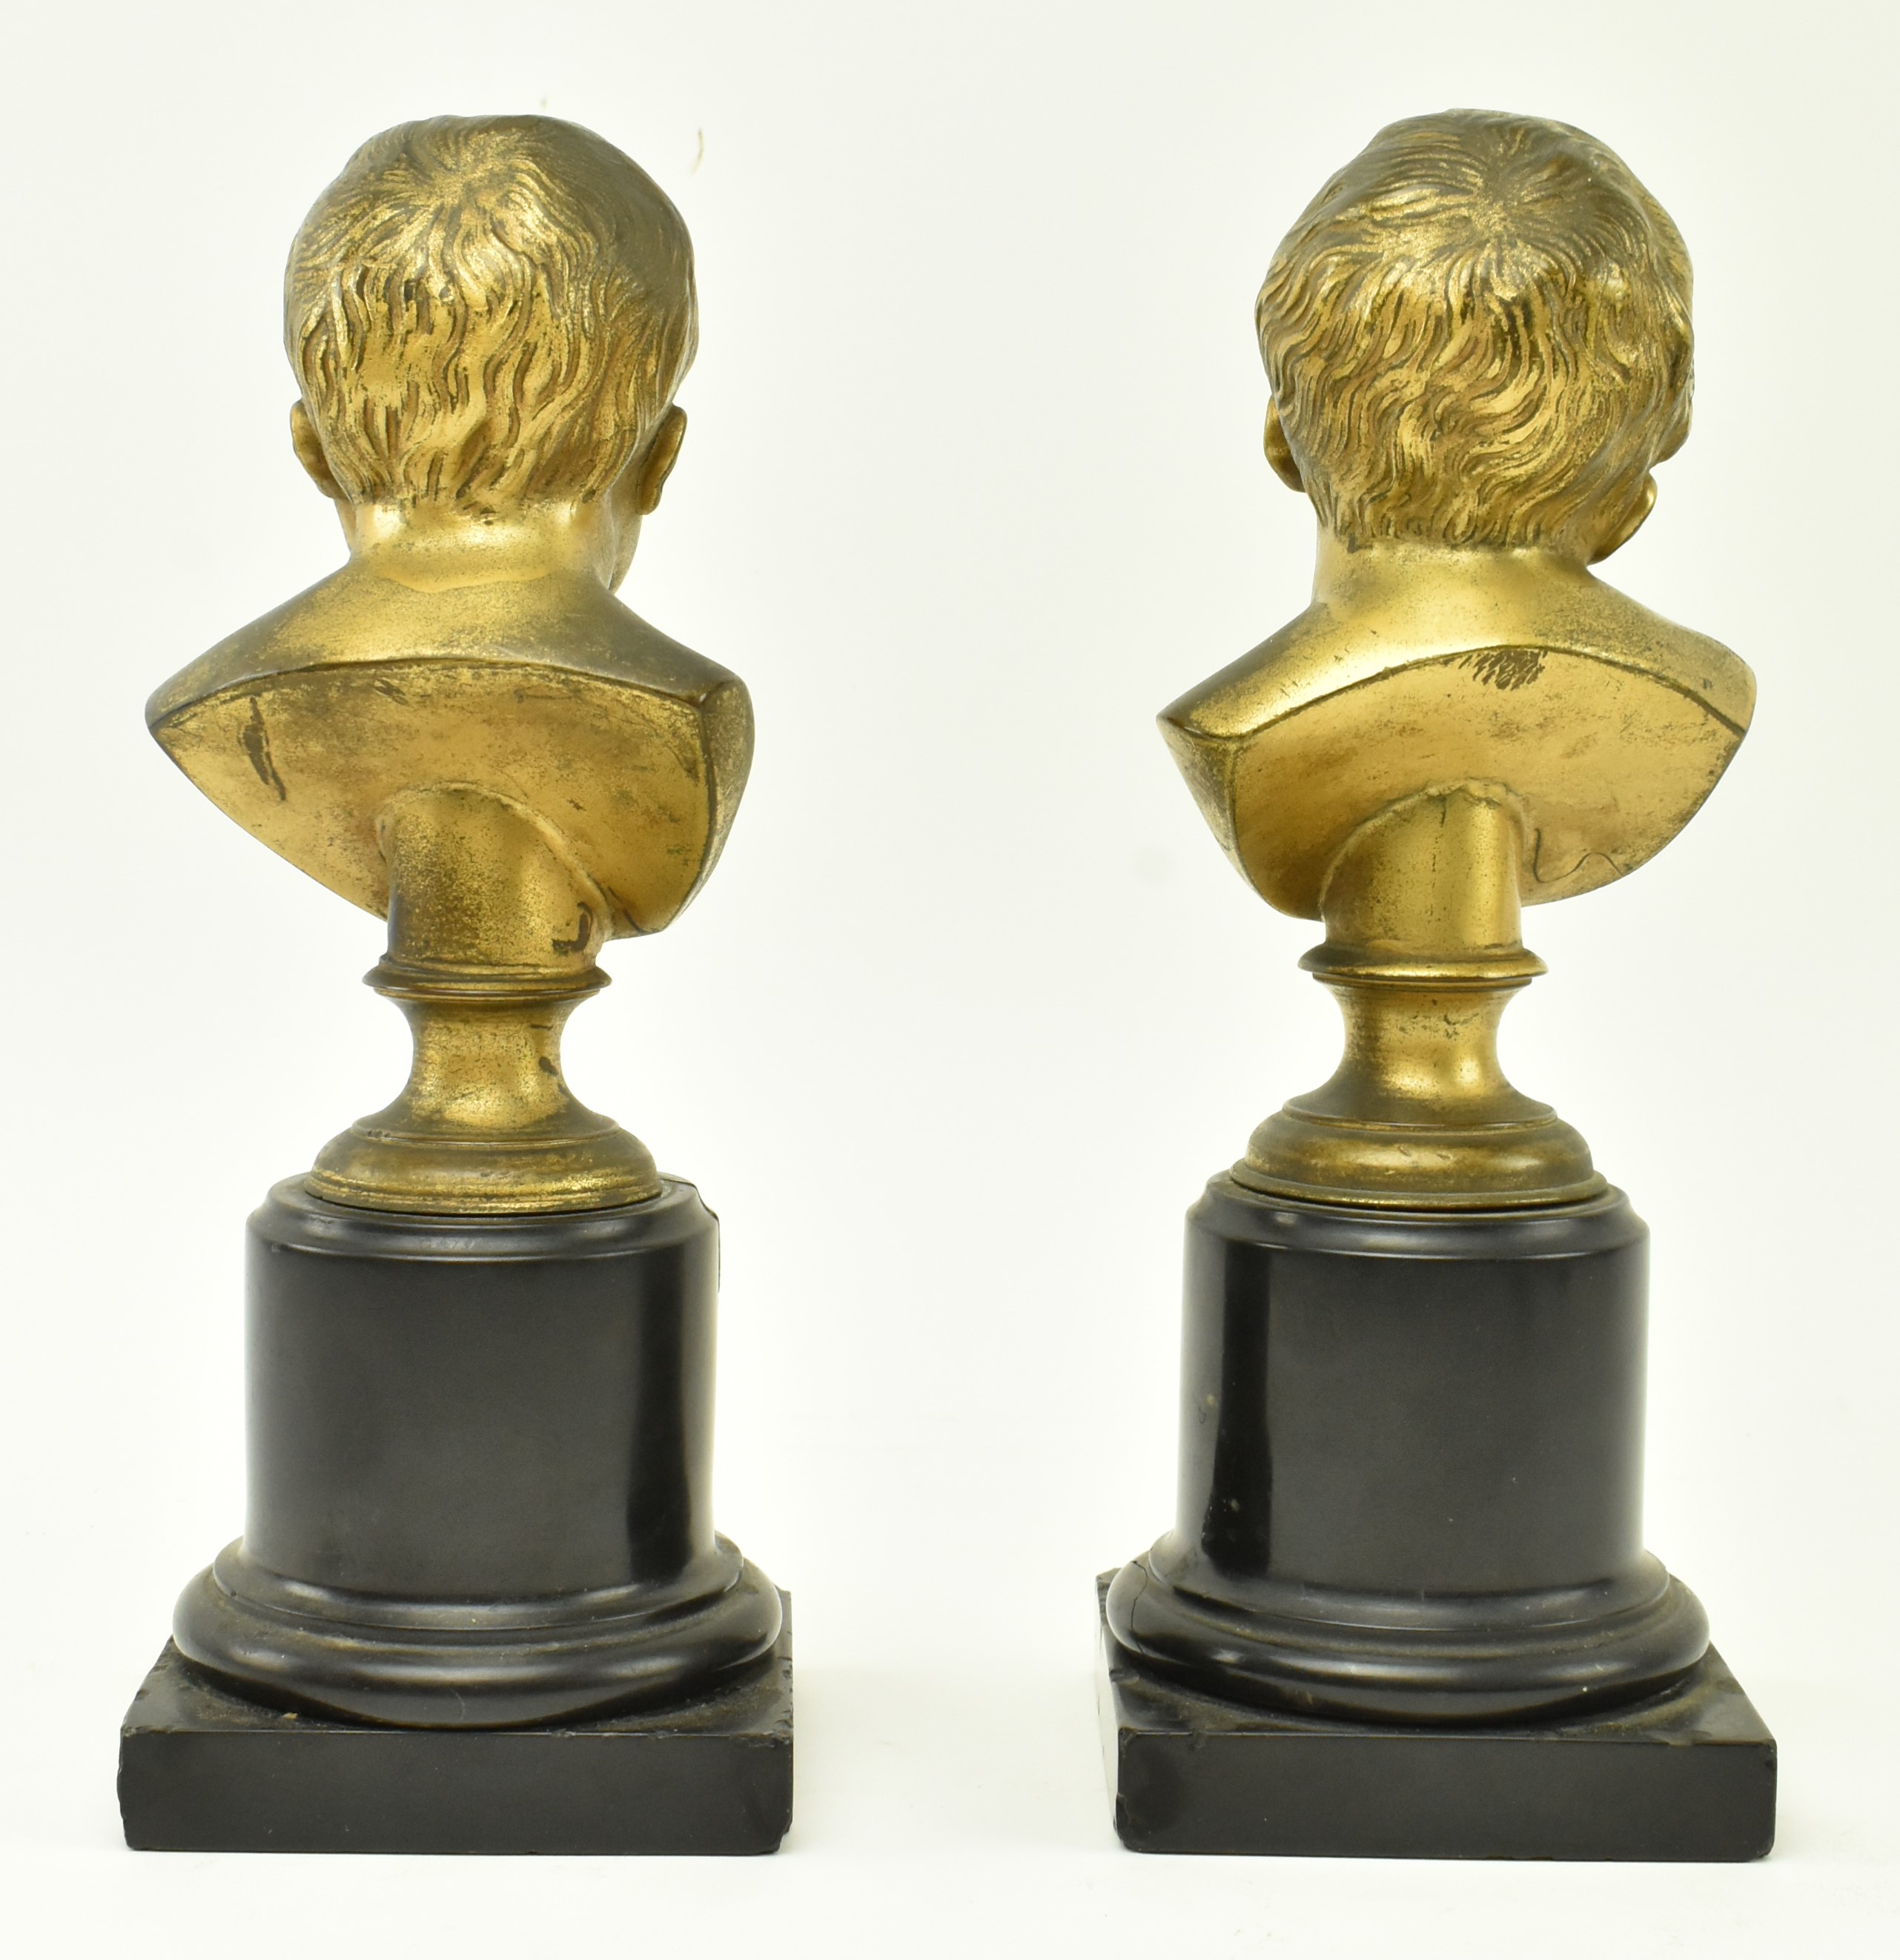 PAIR OF VICTORIAN 19TH CENTURY BRONZE CRYING INFANT BUSTS - Image 3 of 7